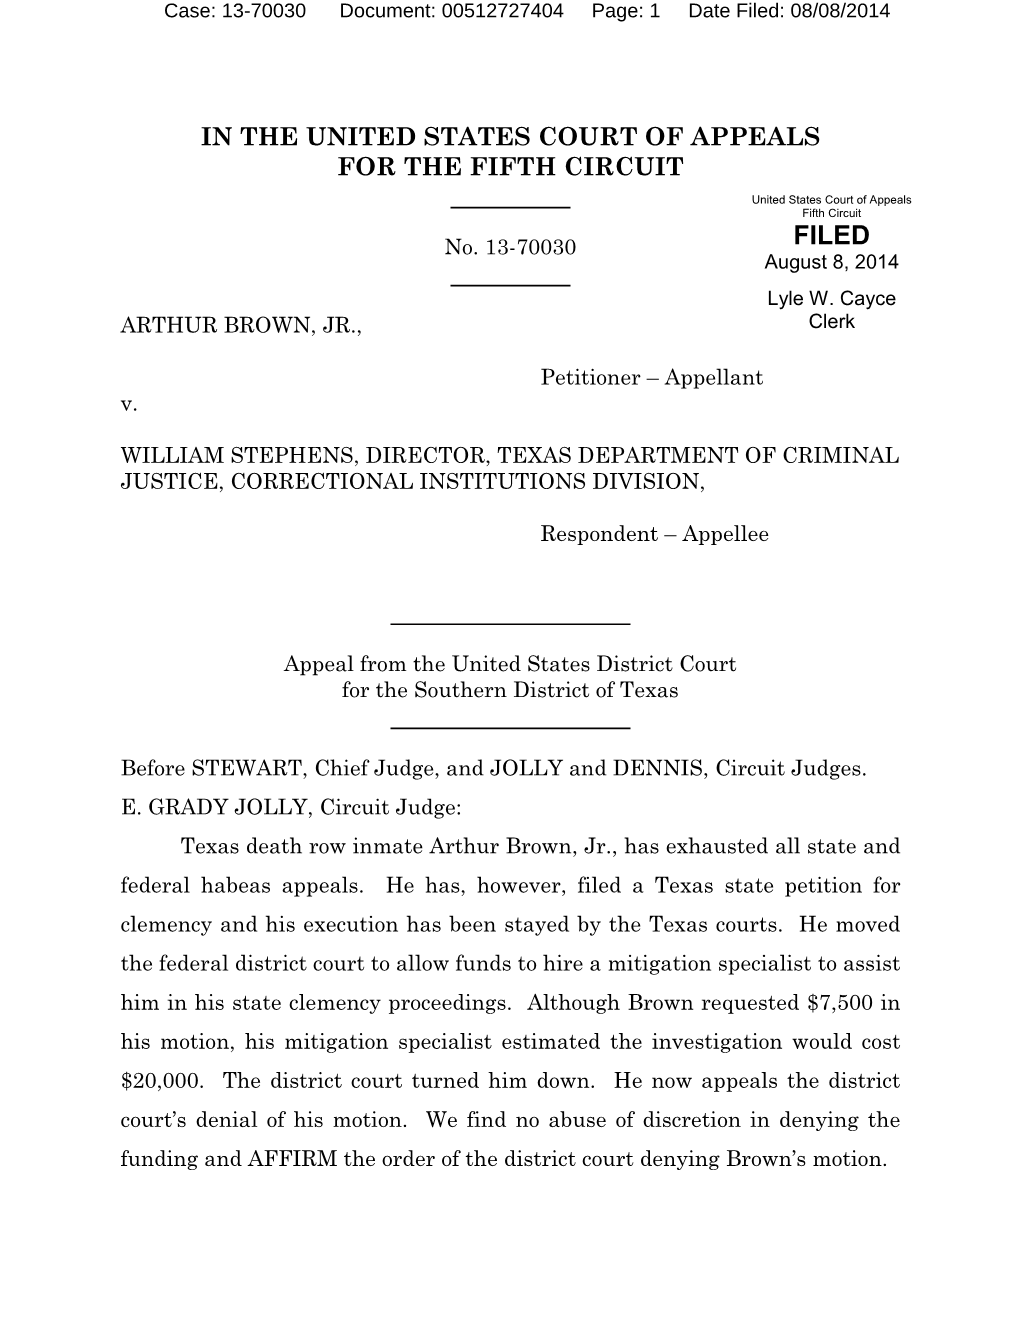 IN the UNITED STATES COURT of APPEALS for the FIFTH CIRCUIT United States Court of Appeals Fifth Circuit No